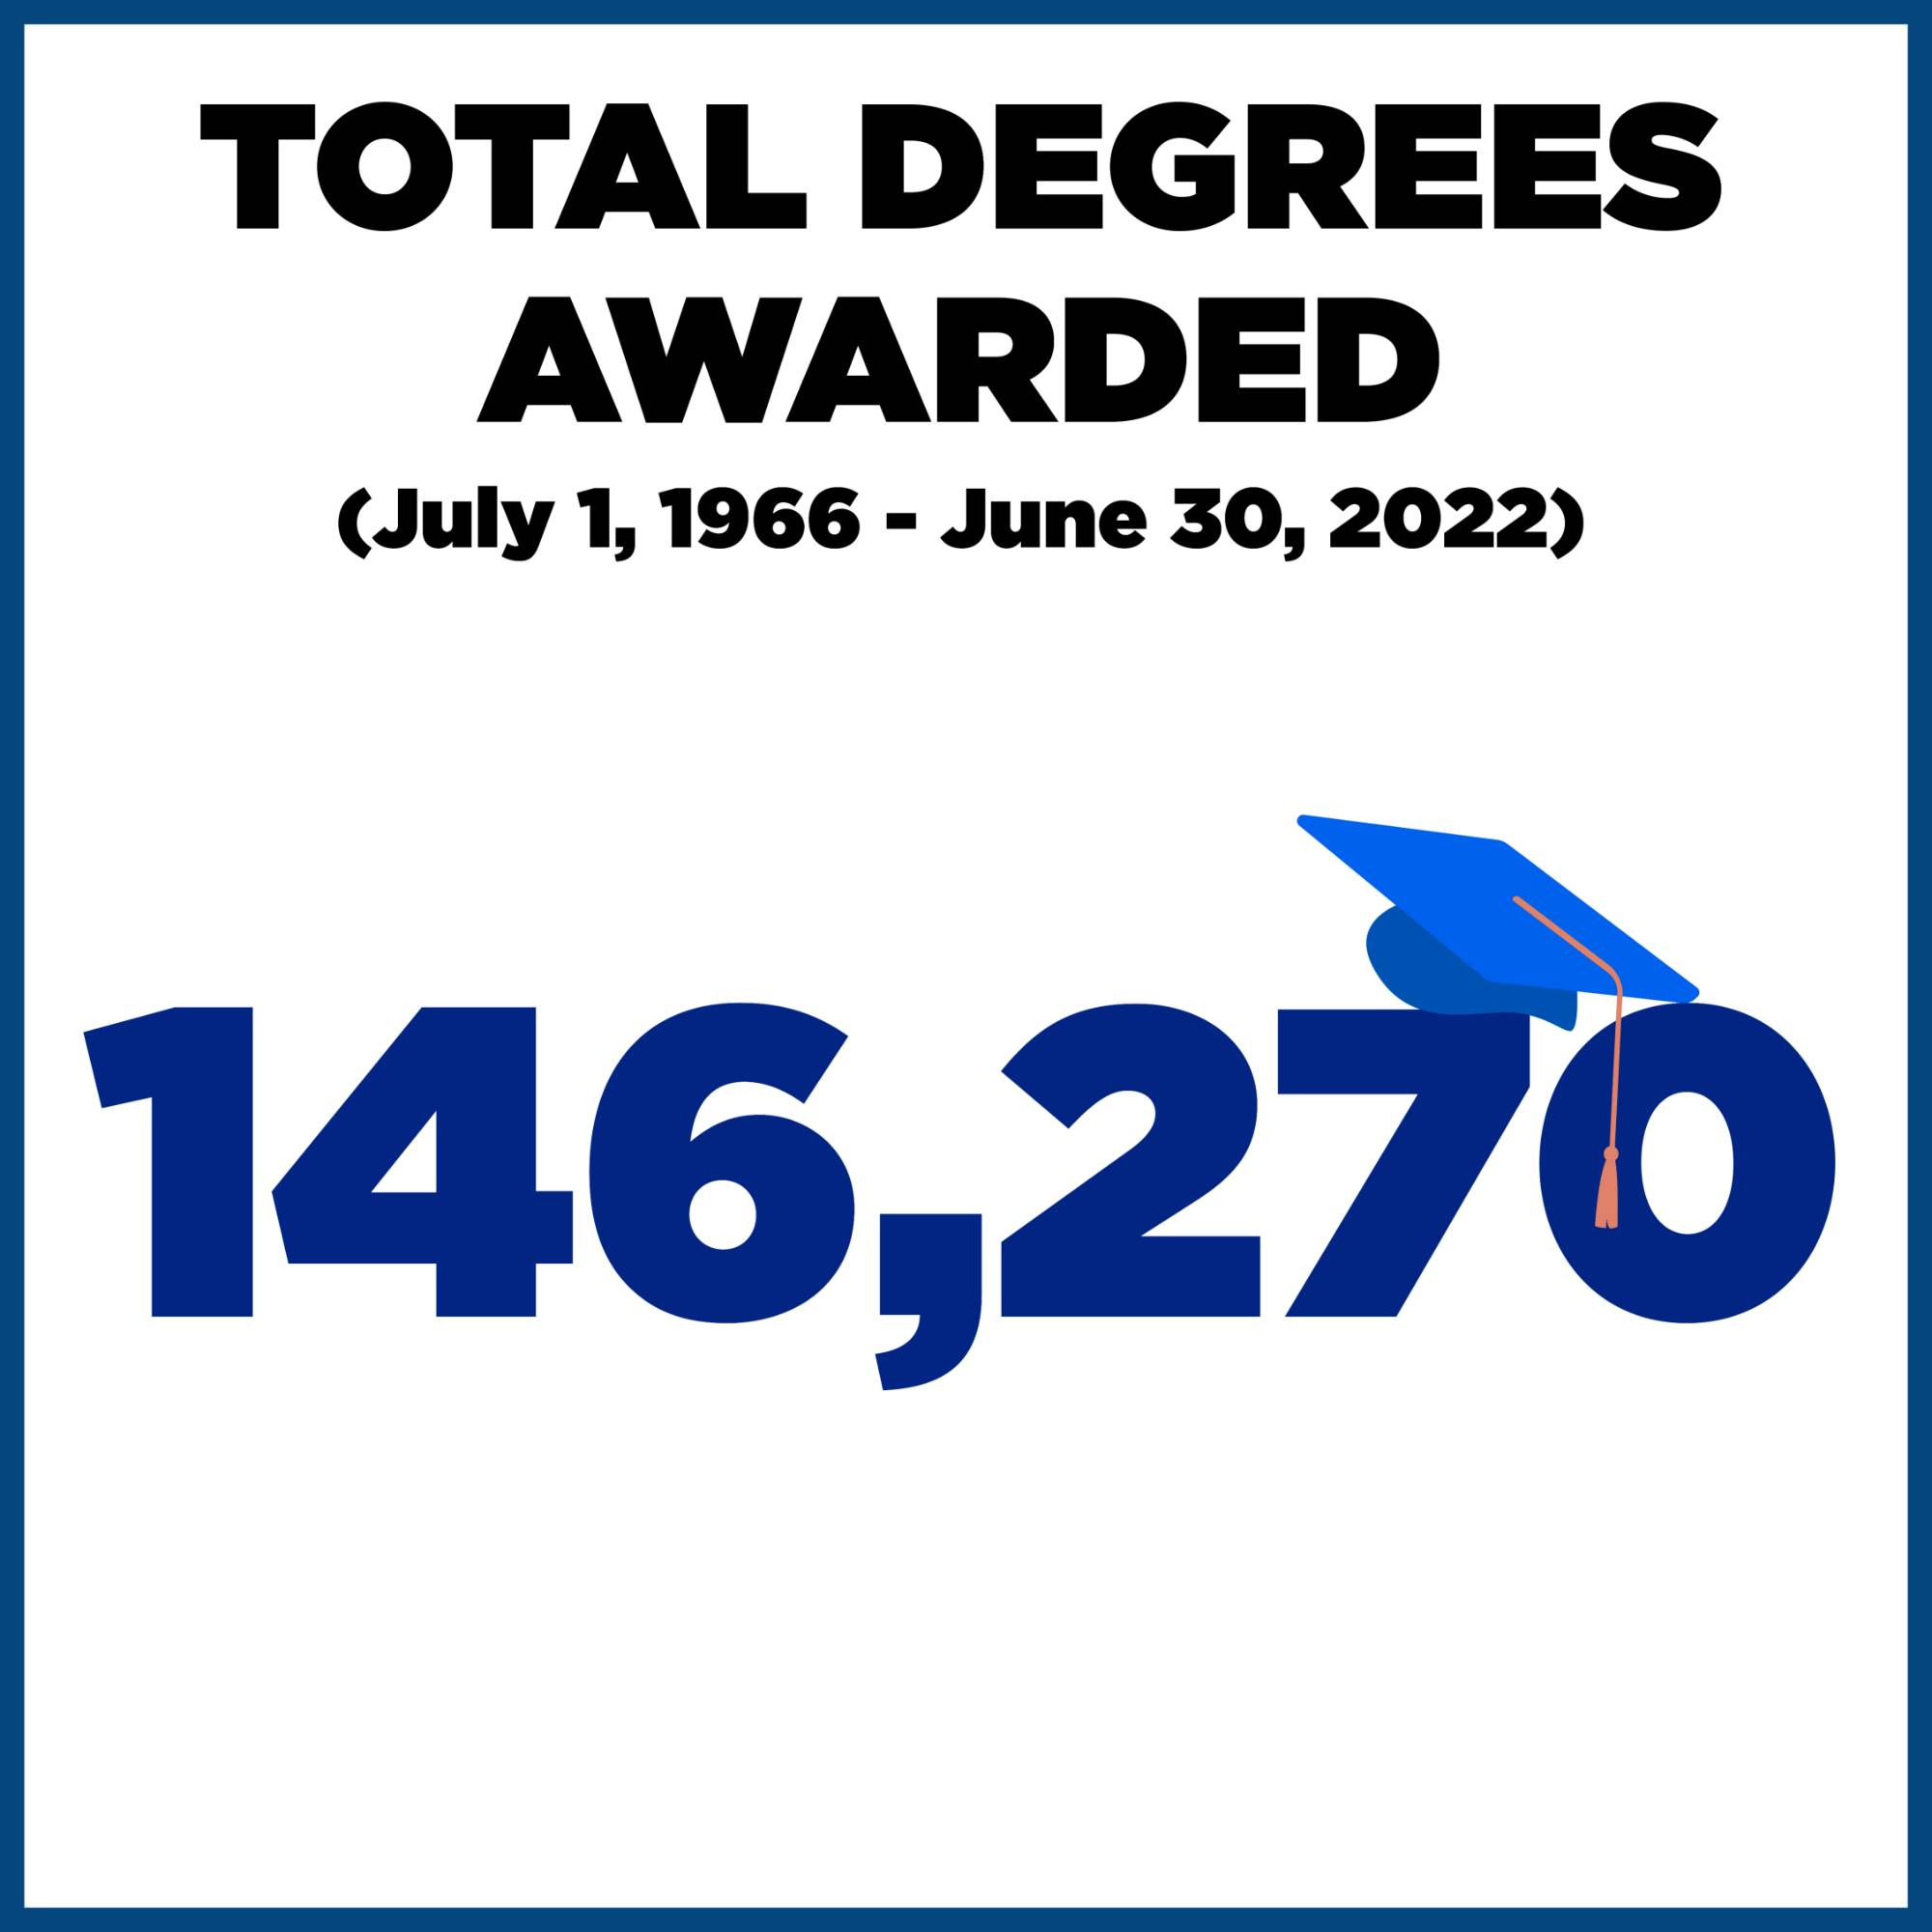 There have been a total of 146,270 degrees awarded at Grand Valley from July 1, 1966 to June 30, 2022.